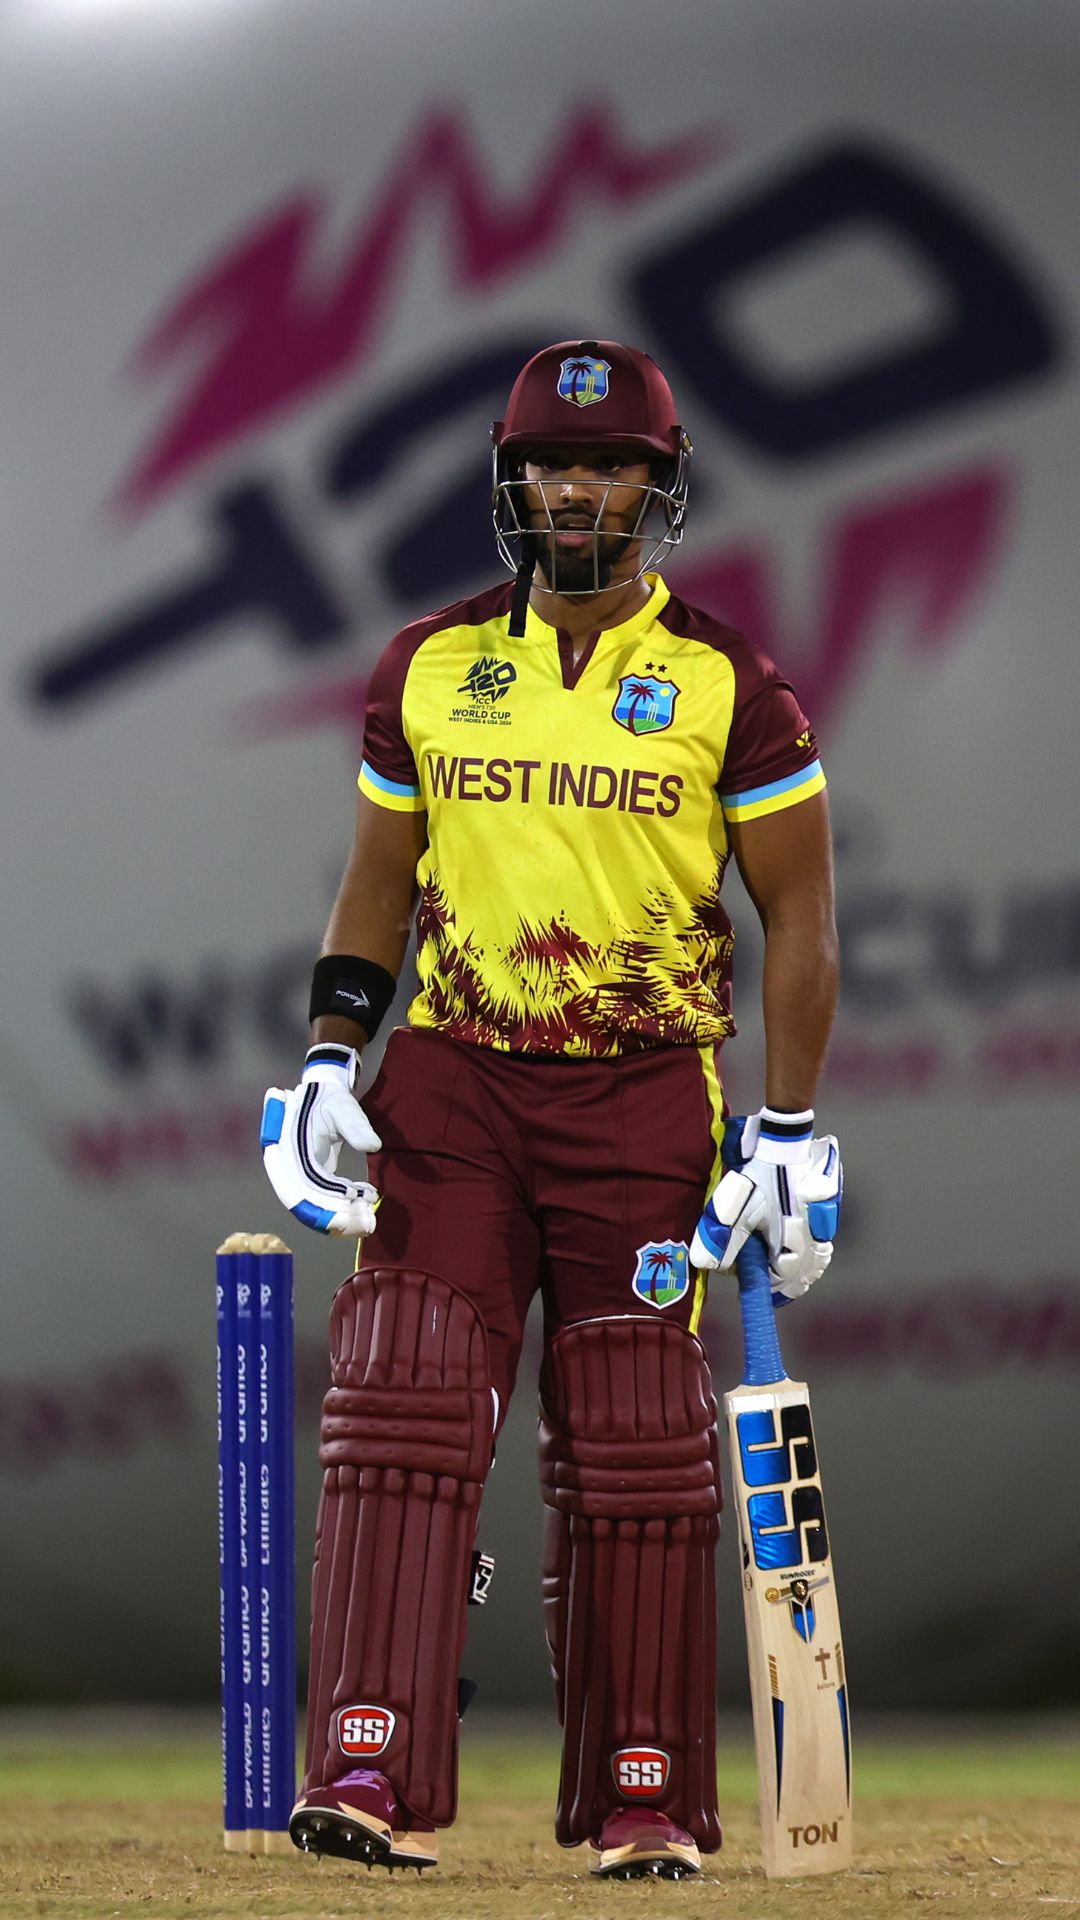 T20 World Cup records created and broken in West Indies vs Afghanistan clash feat Nicholas Pooran